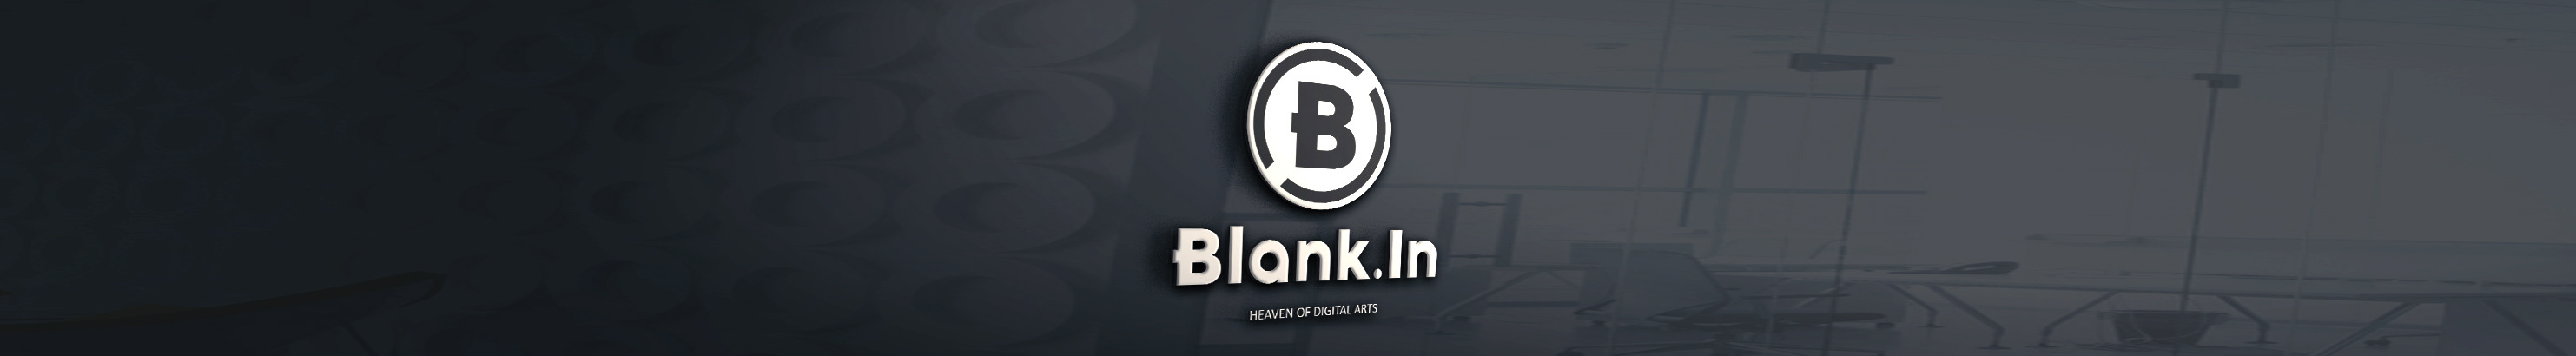 Blank .In's profile banner